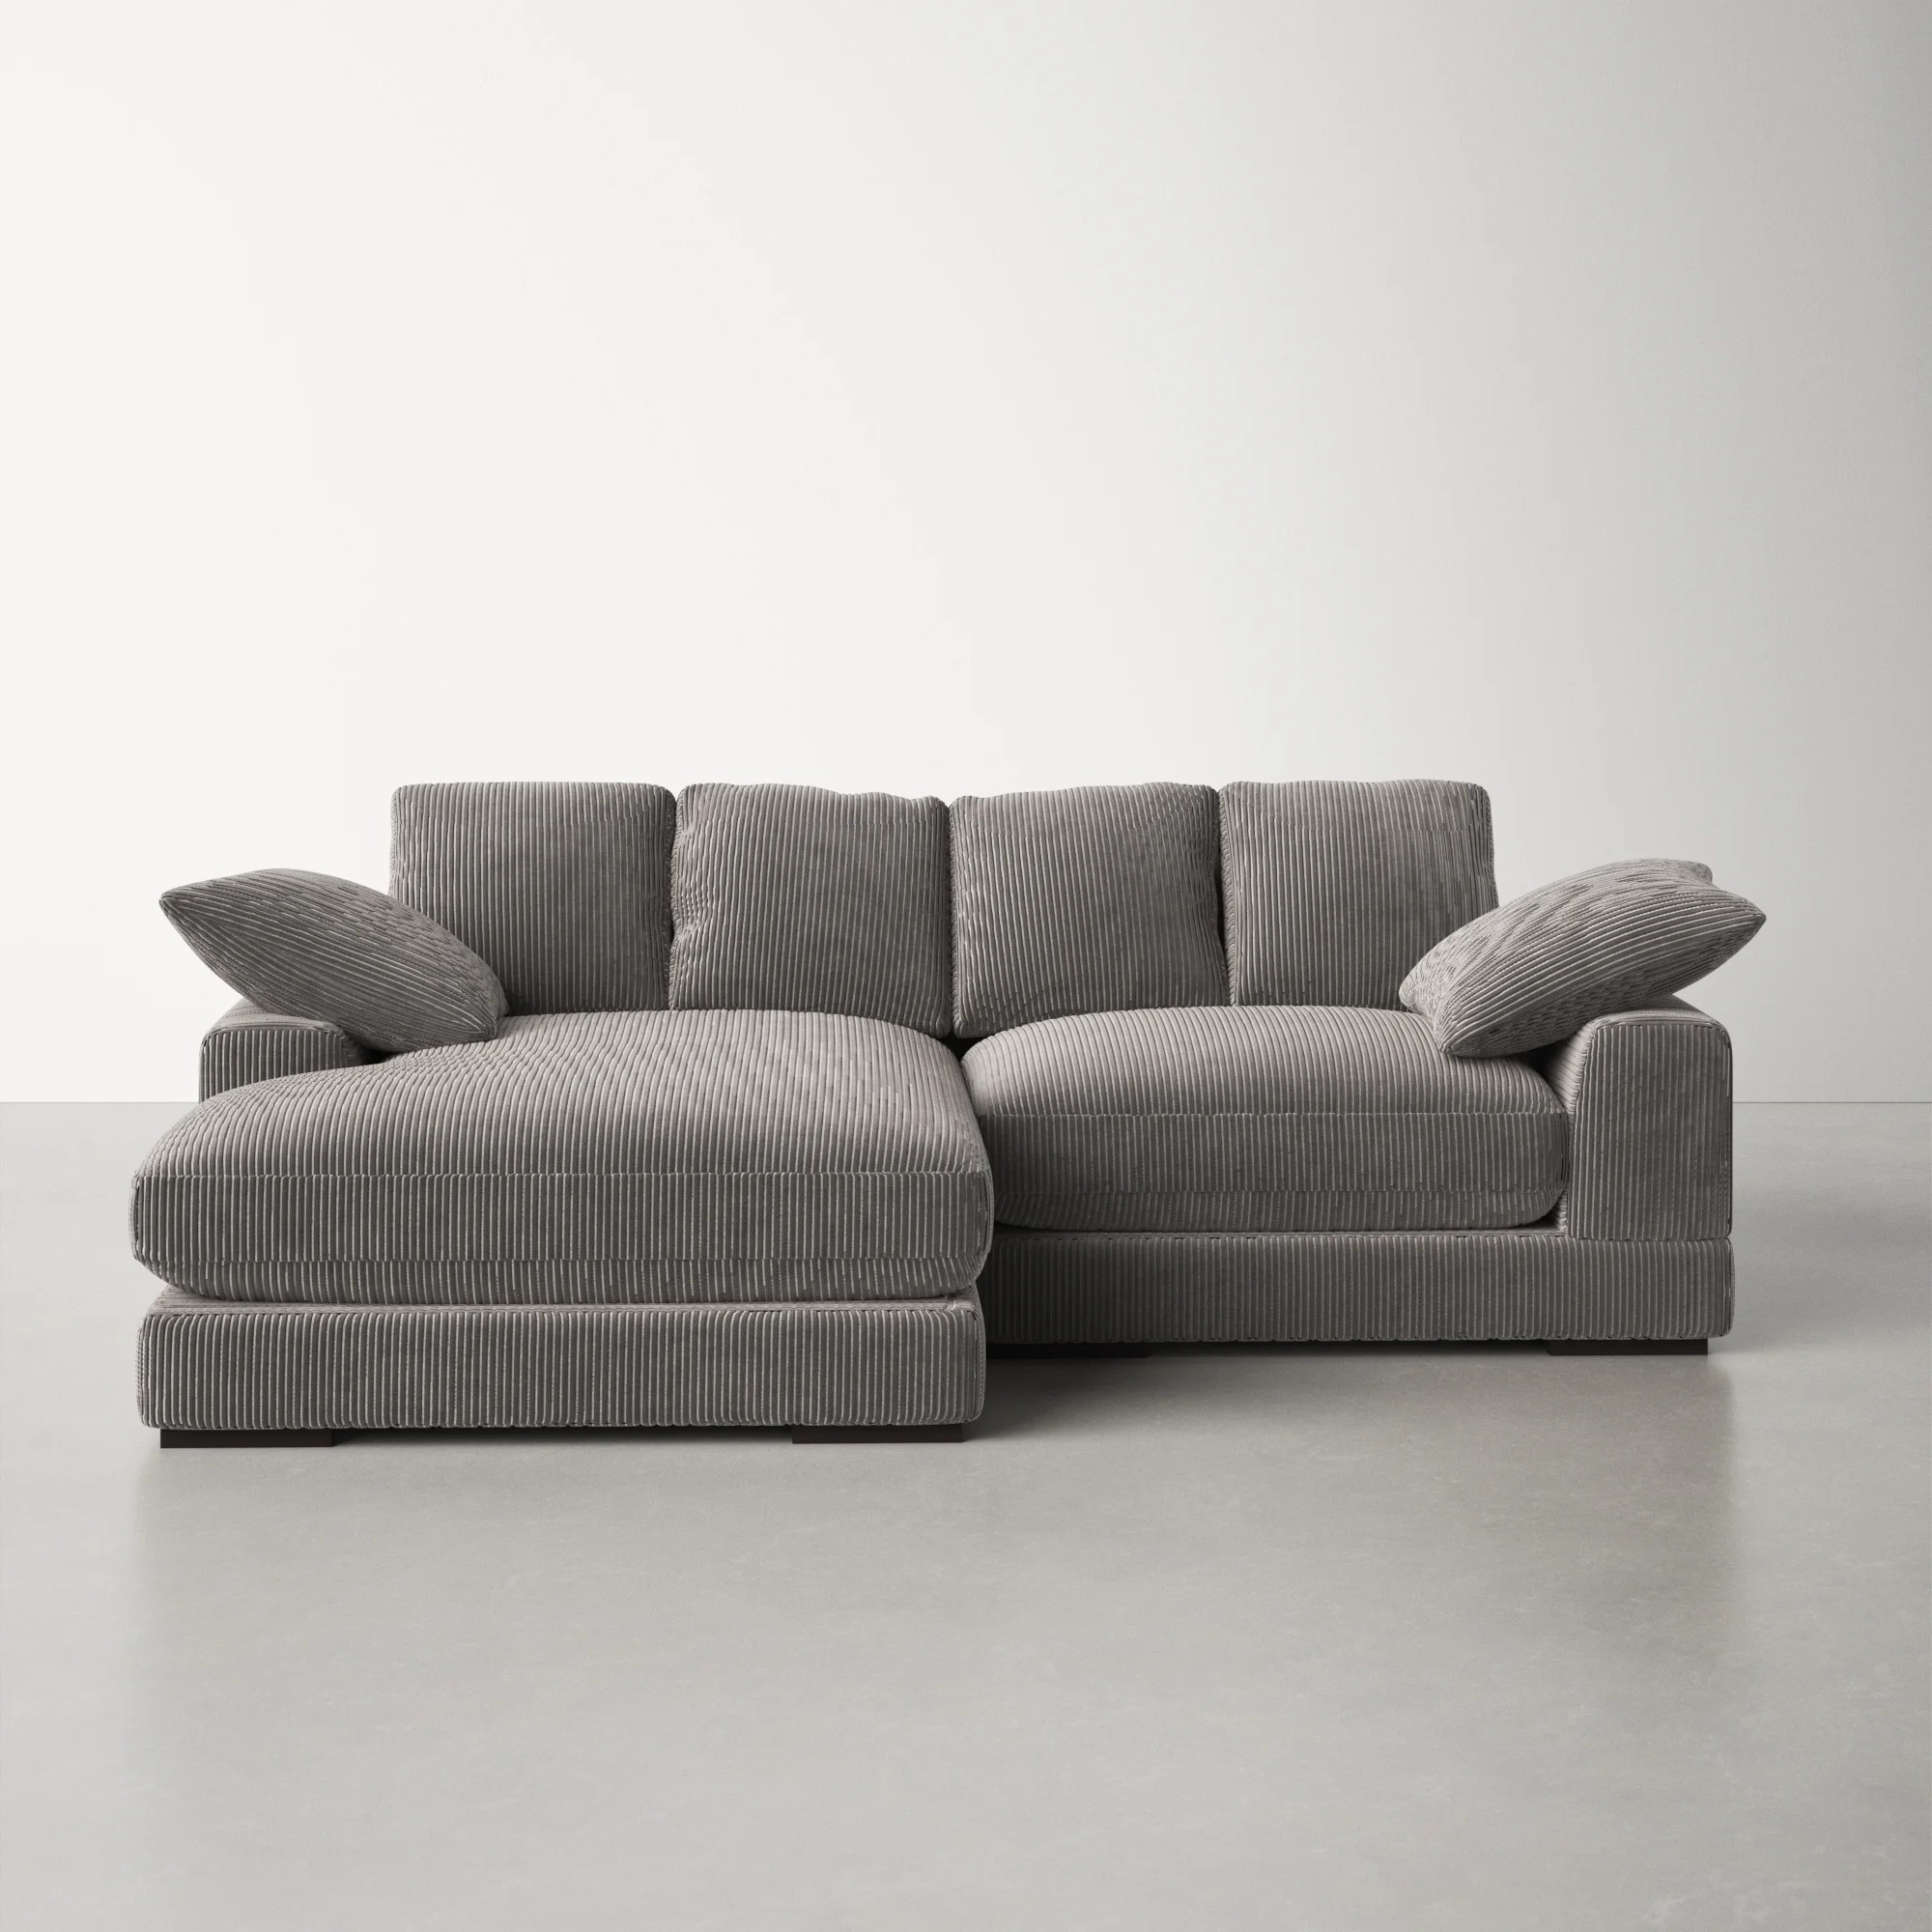 https://video-images.vice.com//products/63c715aba78910db277c17c0/gallery-image/1673991599310-jody2-pieceupholsteredsectional.png?crop=1xw:0.56xh;0xw,0.22xh